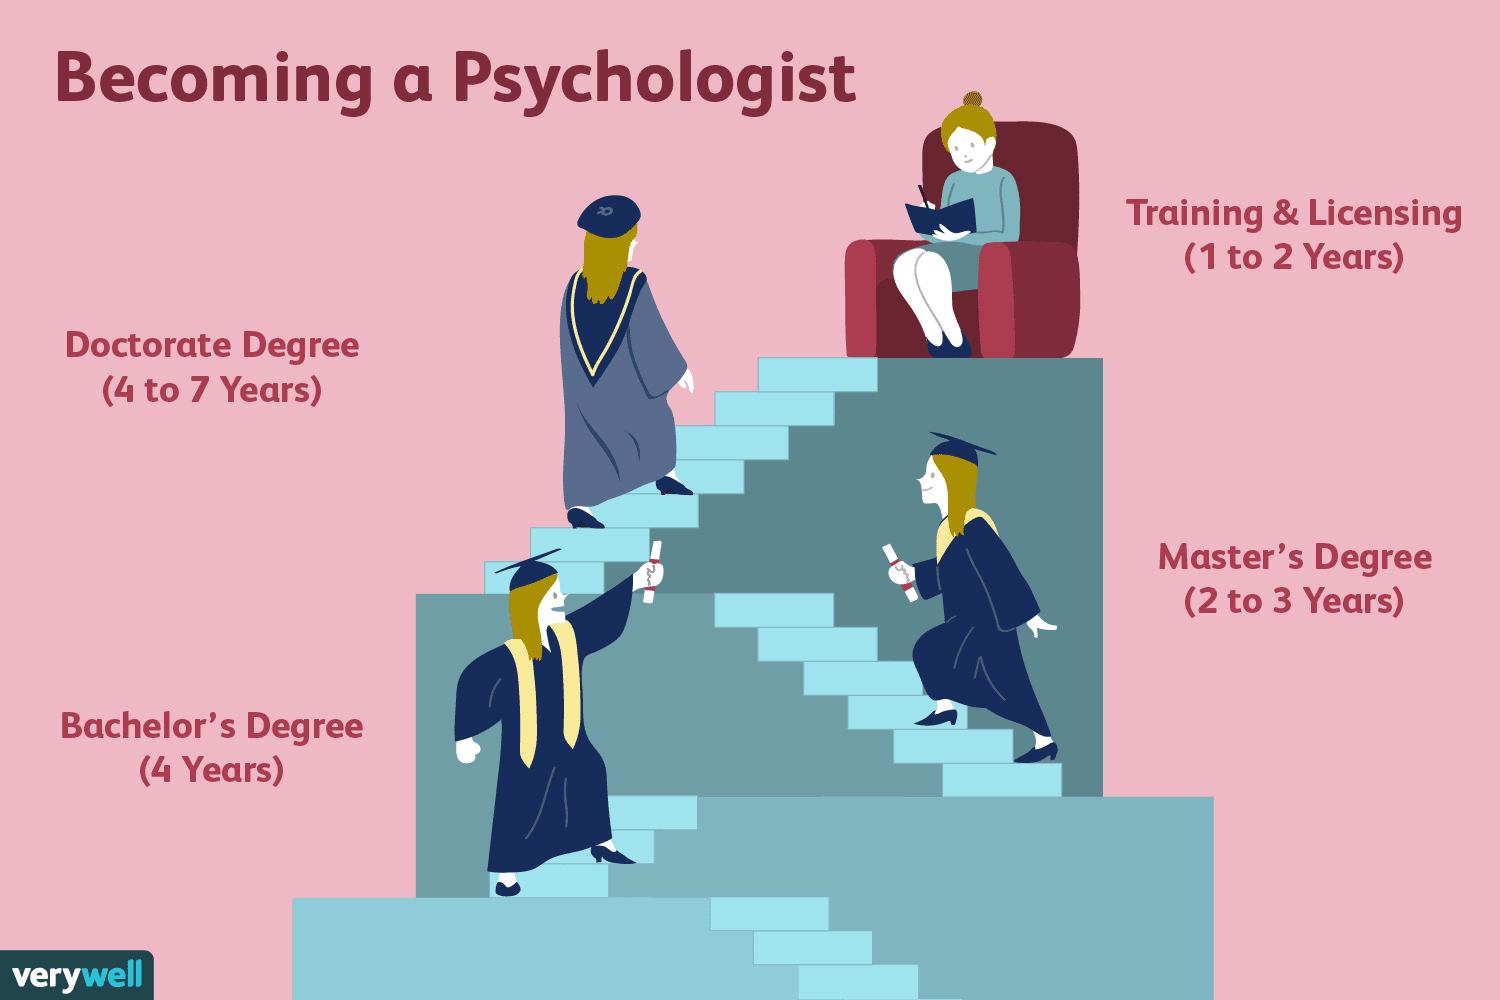 How Long Does It Take to Become a Psychologist?